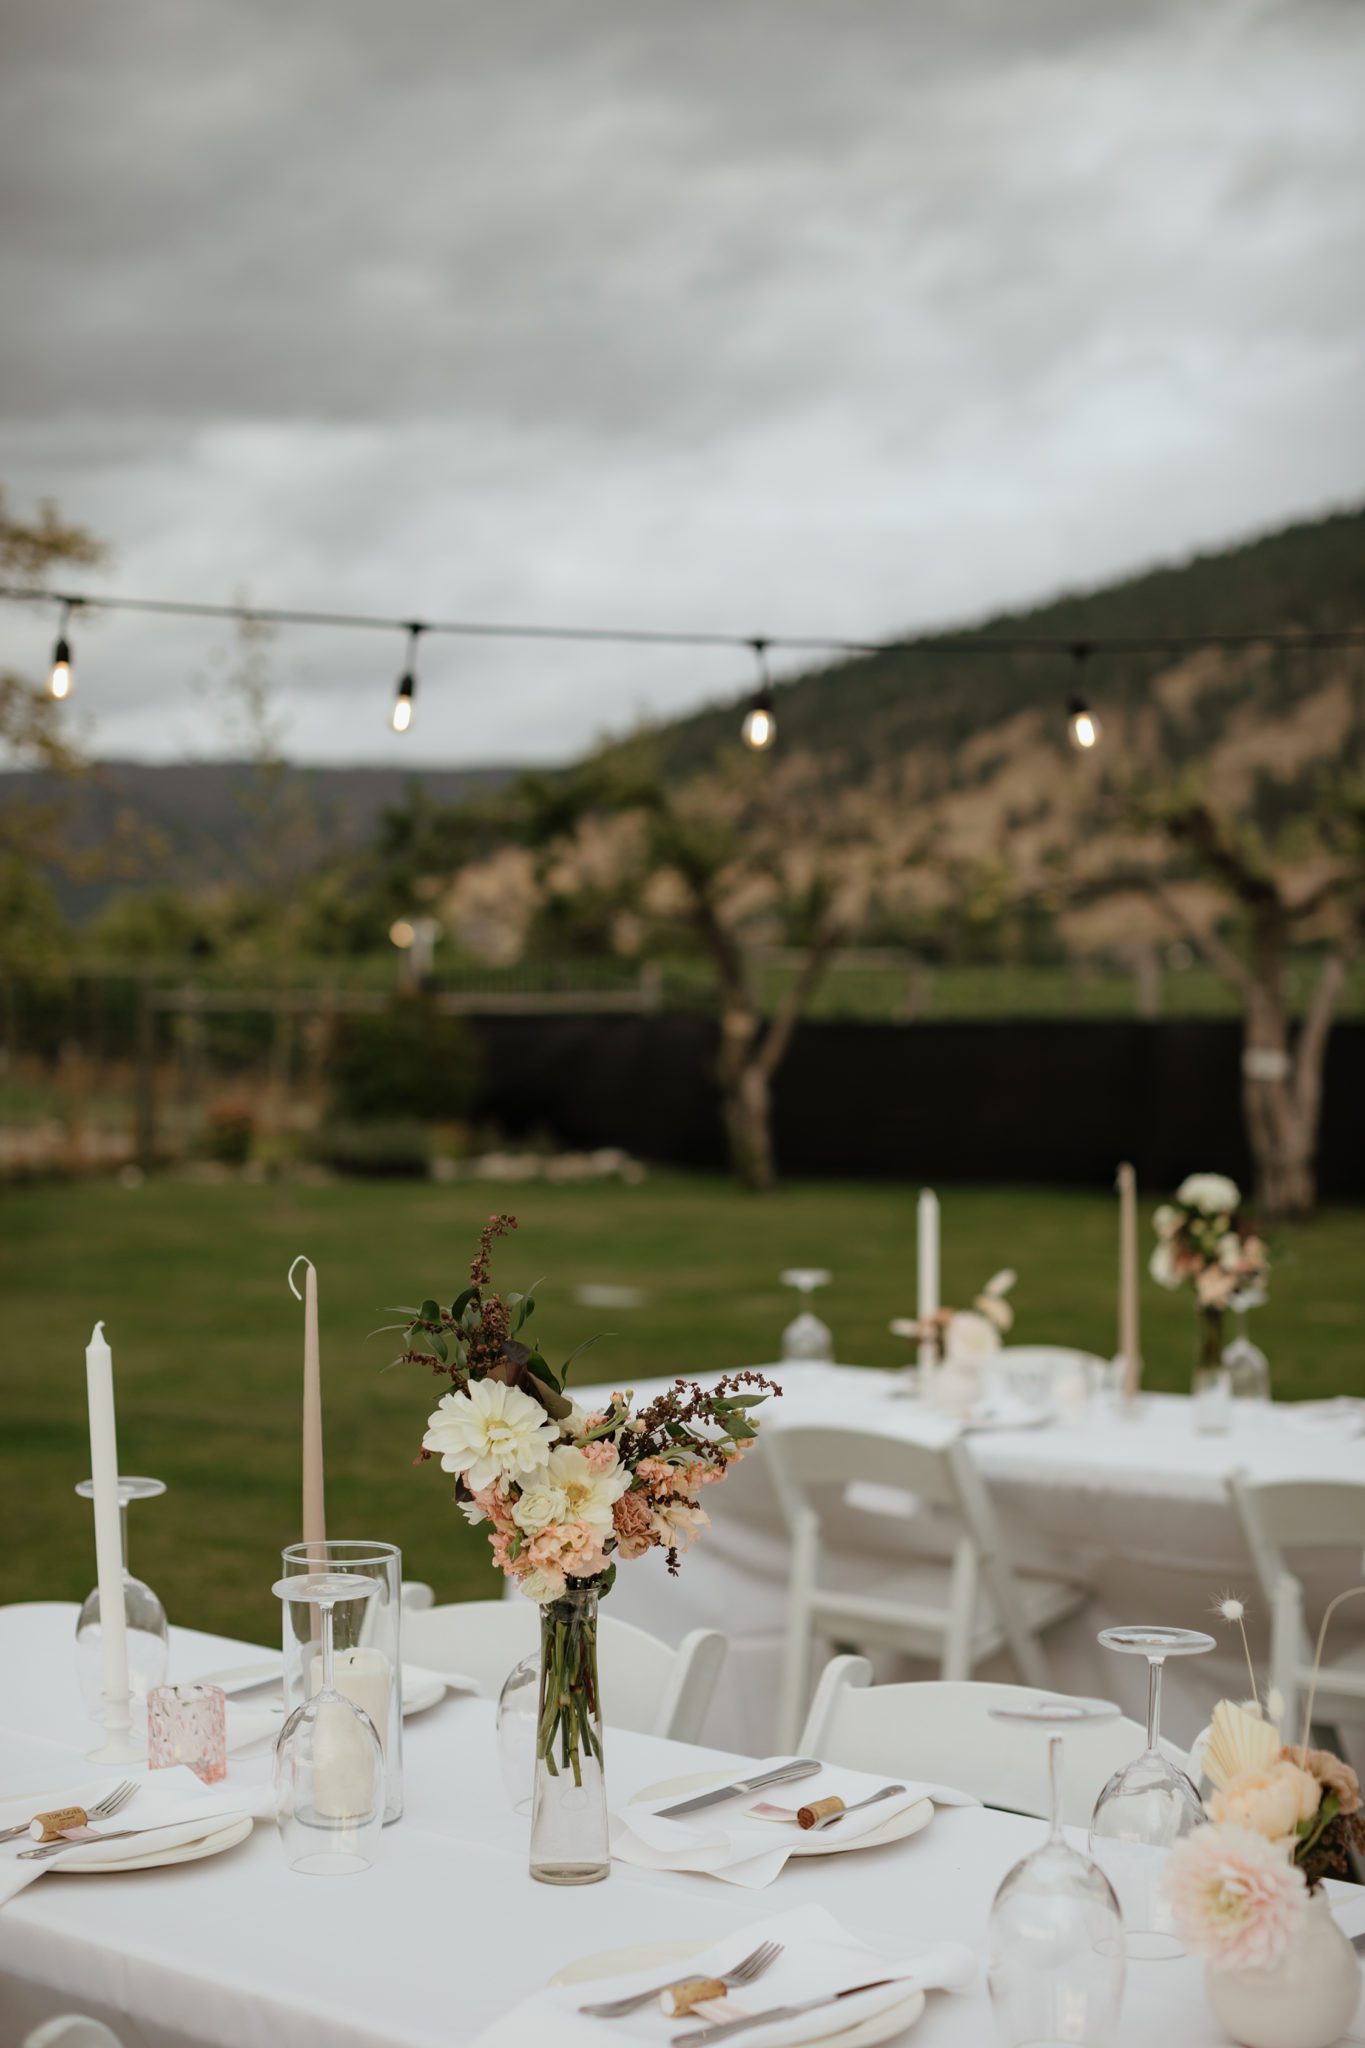 Stunning outdoor summer wedding reception decor inspiration with white decor and blush accents